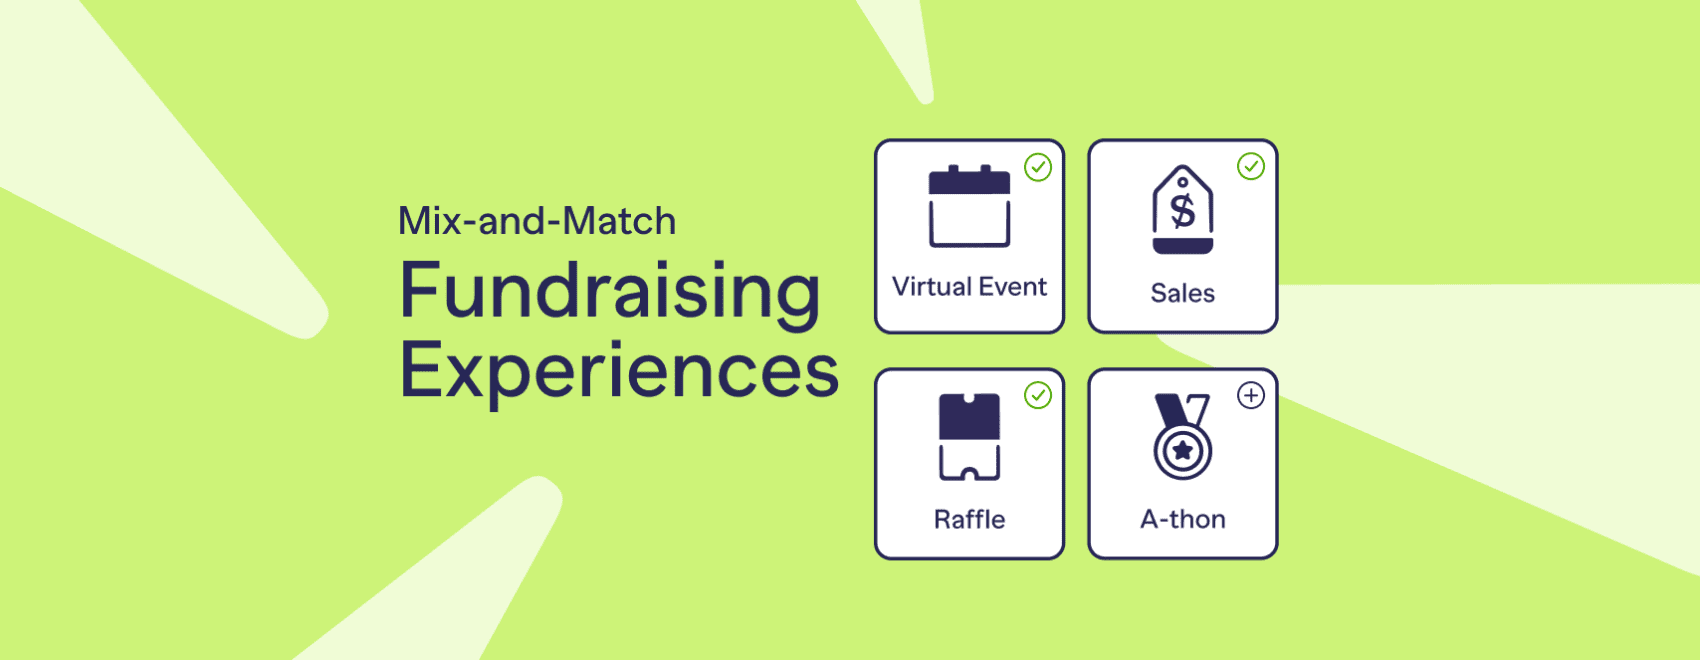 Mix and Match Fundraising